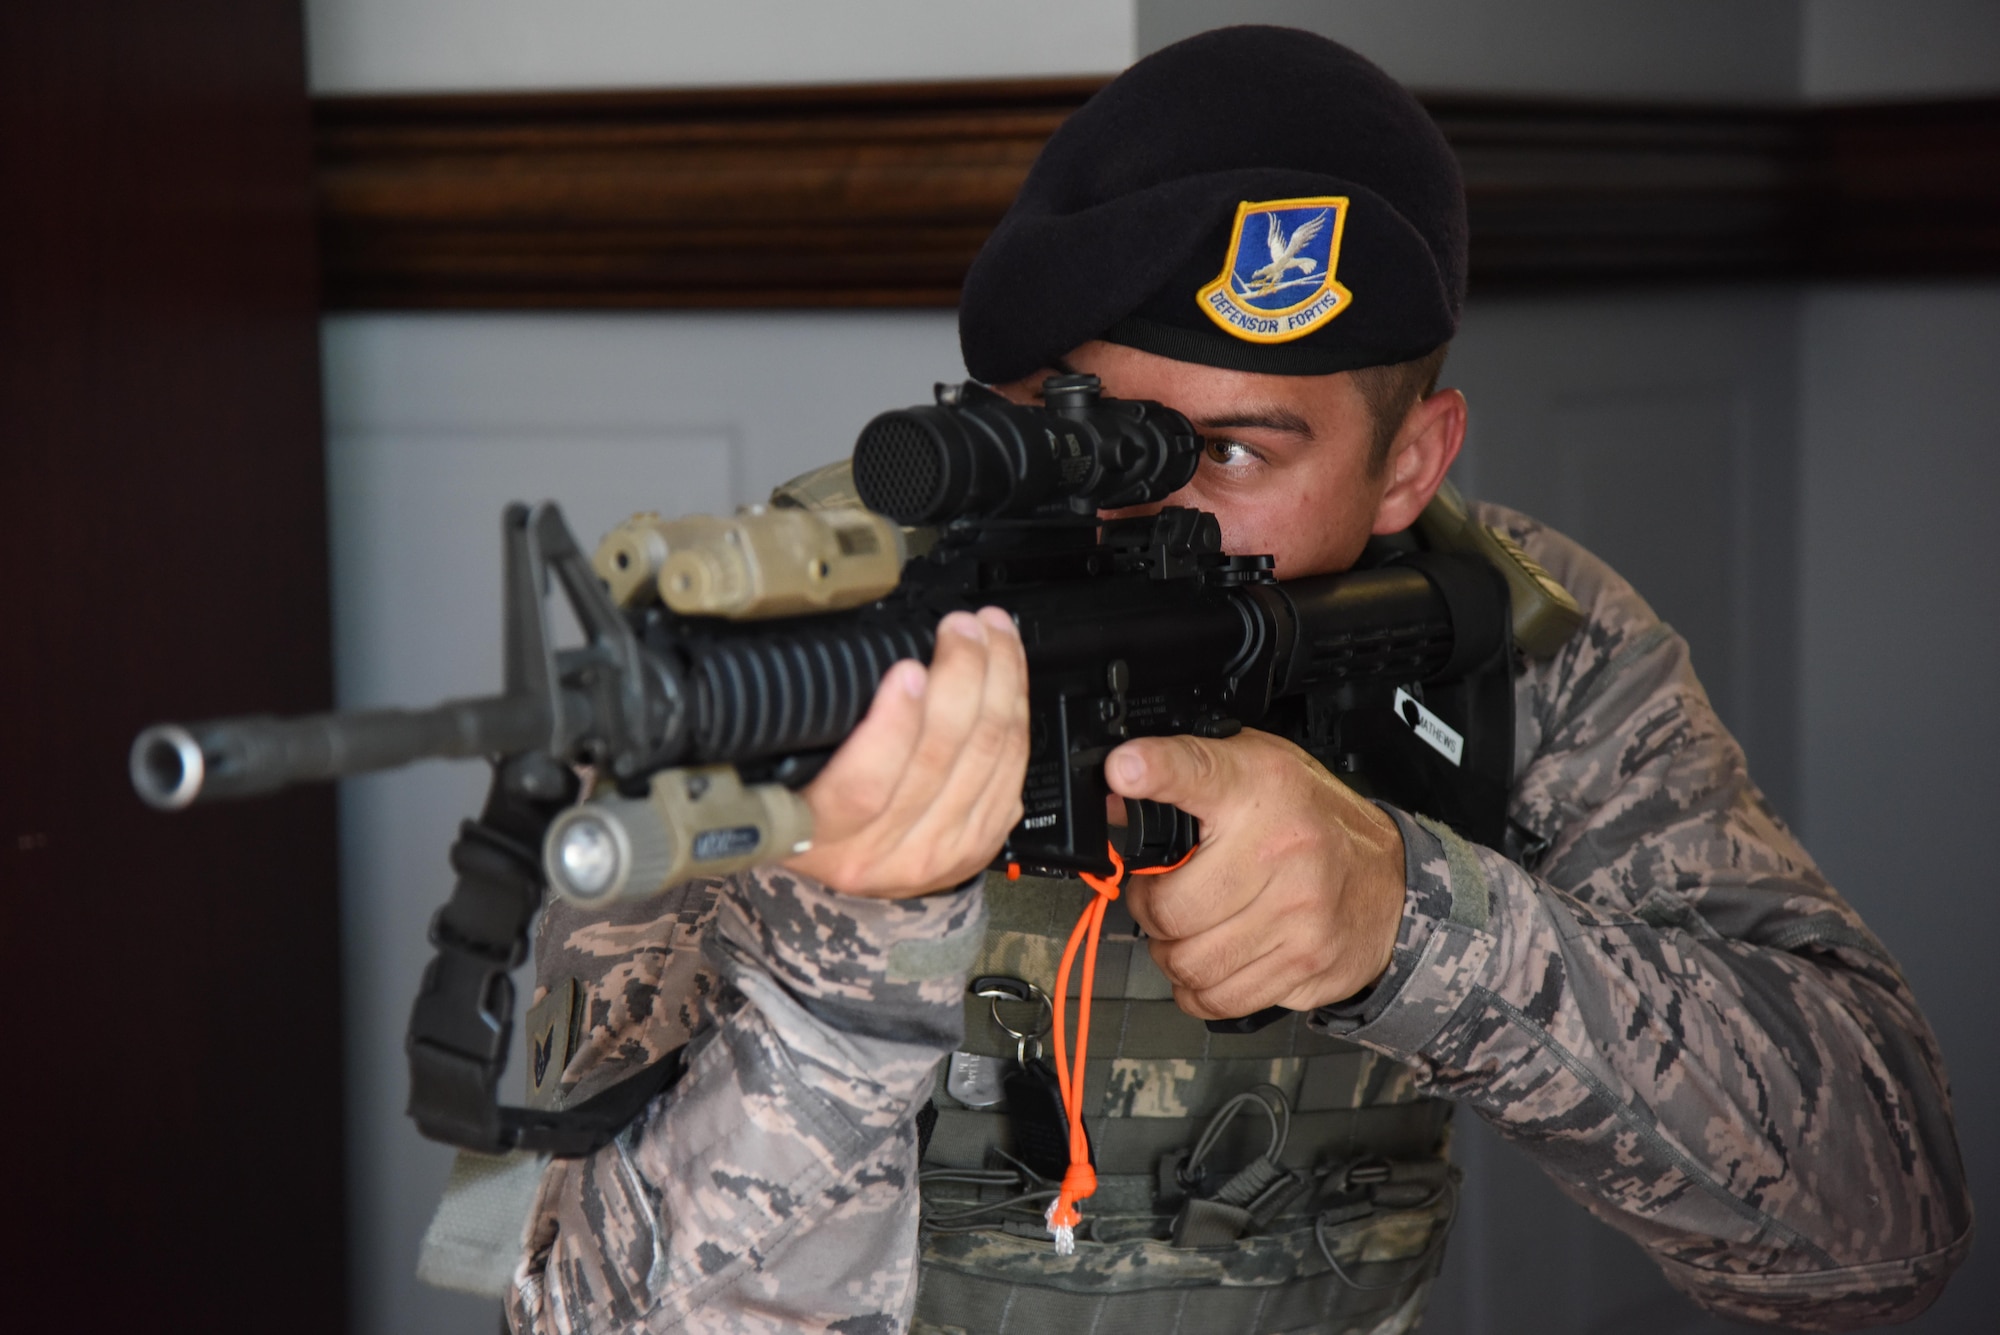 Staff Sgt. James Matthews II, 81st Security Forces Squadron flight sergeant, holds his post during an active shooter exercise at the Larcher Chapel Sept. 21, 2017, on Keesler Air Force Base, Mississippi. An active duty Air Force member simulated opening fire at the Arnold Medical Annex and the Larcher Chapel in order to test the base's ability to respond to and recover from a mass casualty event. (U.S. Air Force photo by Kemberly Groue)